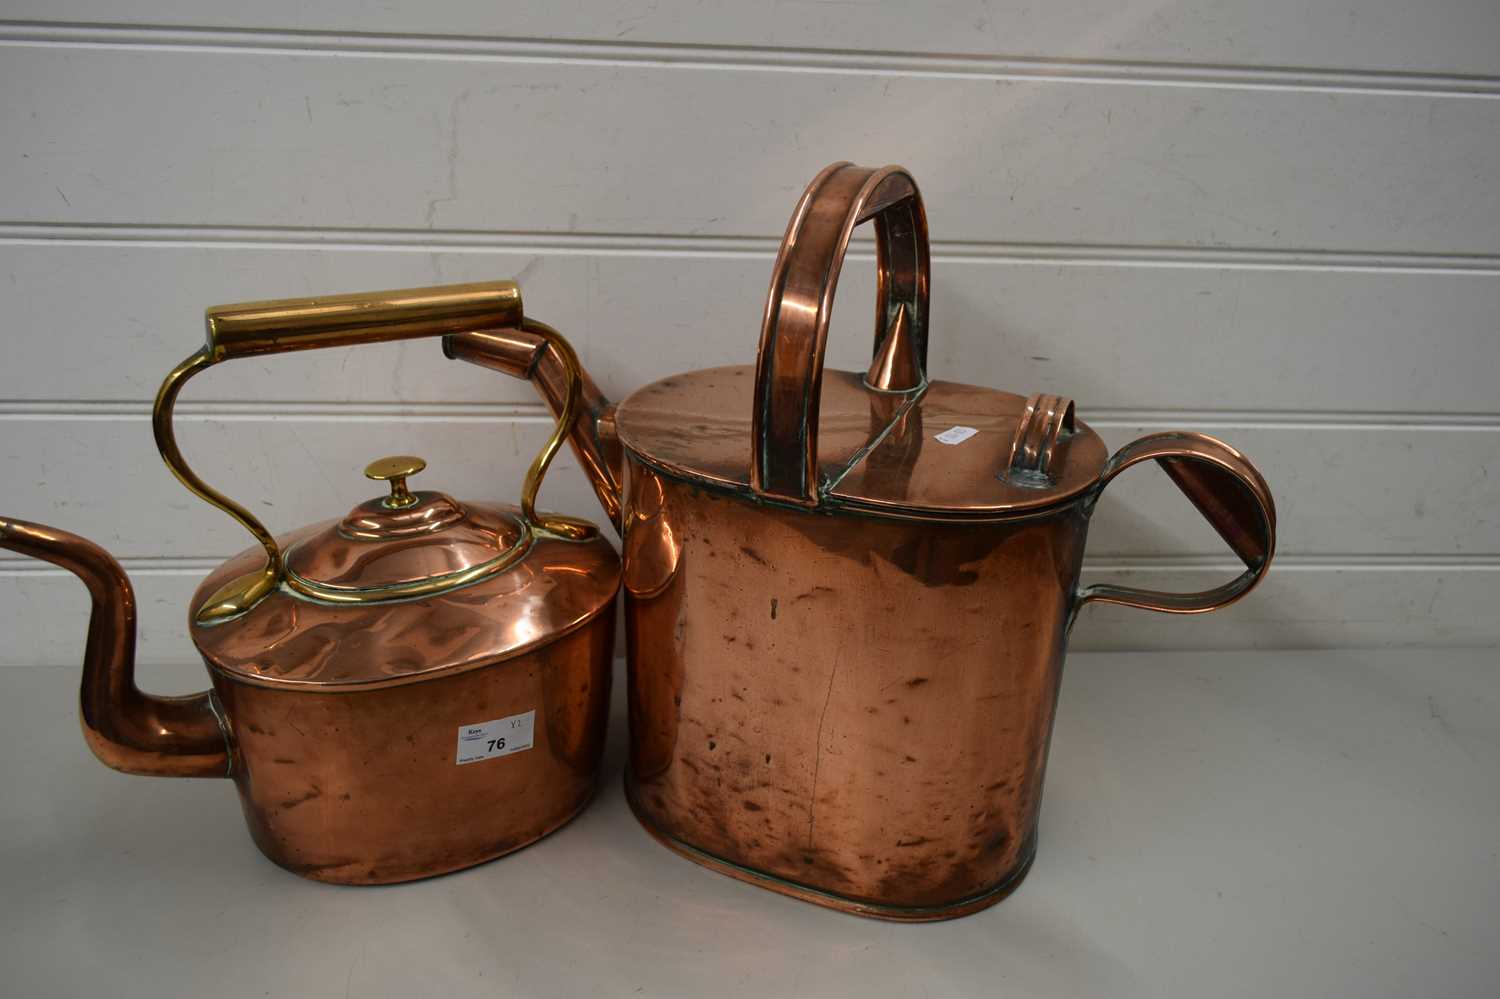 Lot 76 - LARGE COPPER KETTLE AND COPPER WATERING CAN